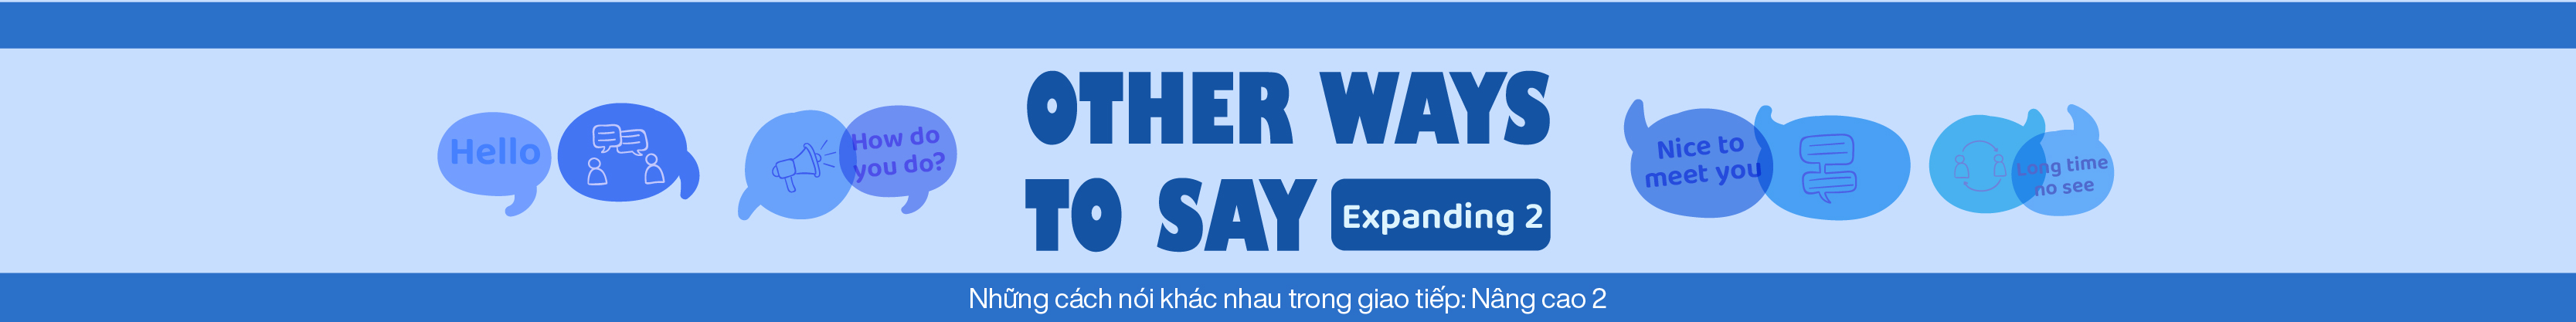 OTHER WAYS TO SAY: EXPANDING 2 banner